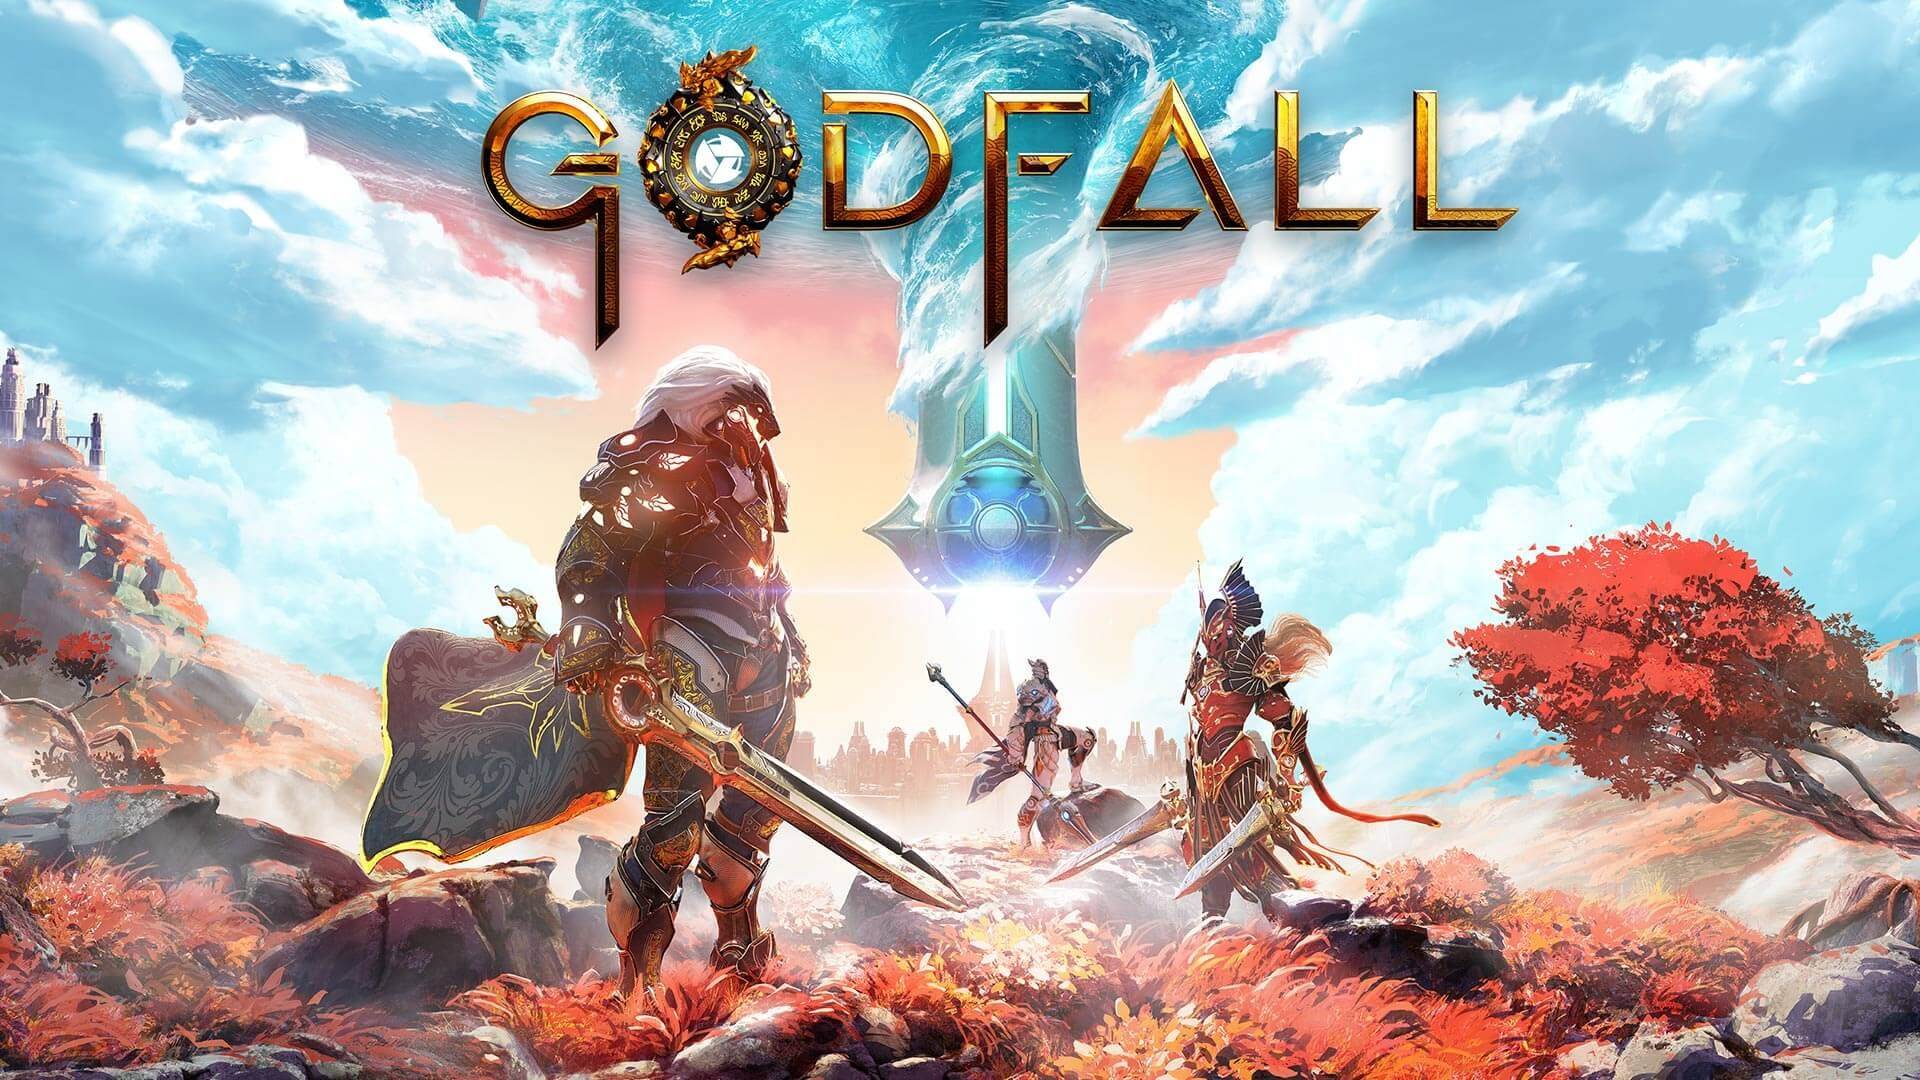 Take a look at some gameplay from Godfall